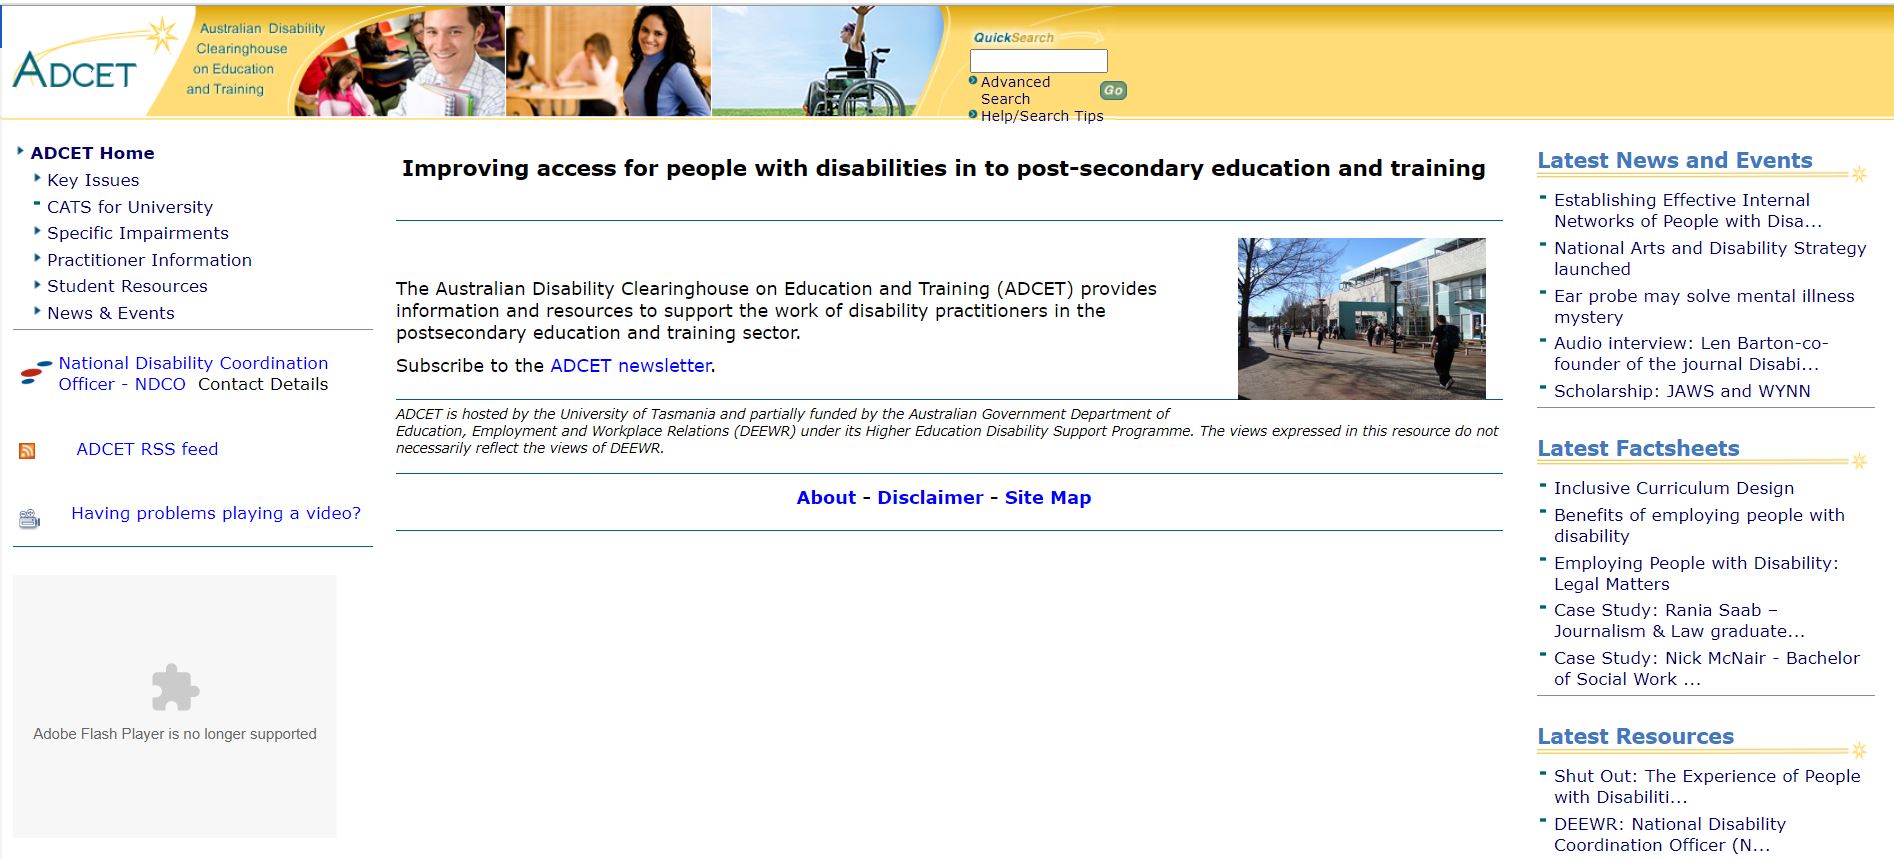 Screen shot of an ADCET webpage from 2008 showing a refreshed look to the website with distinct areas, images and a banner at the top of the page.